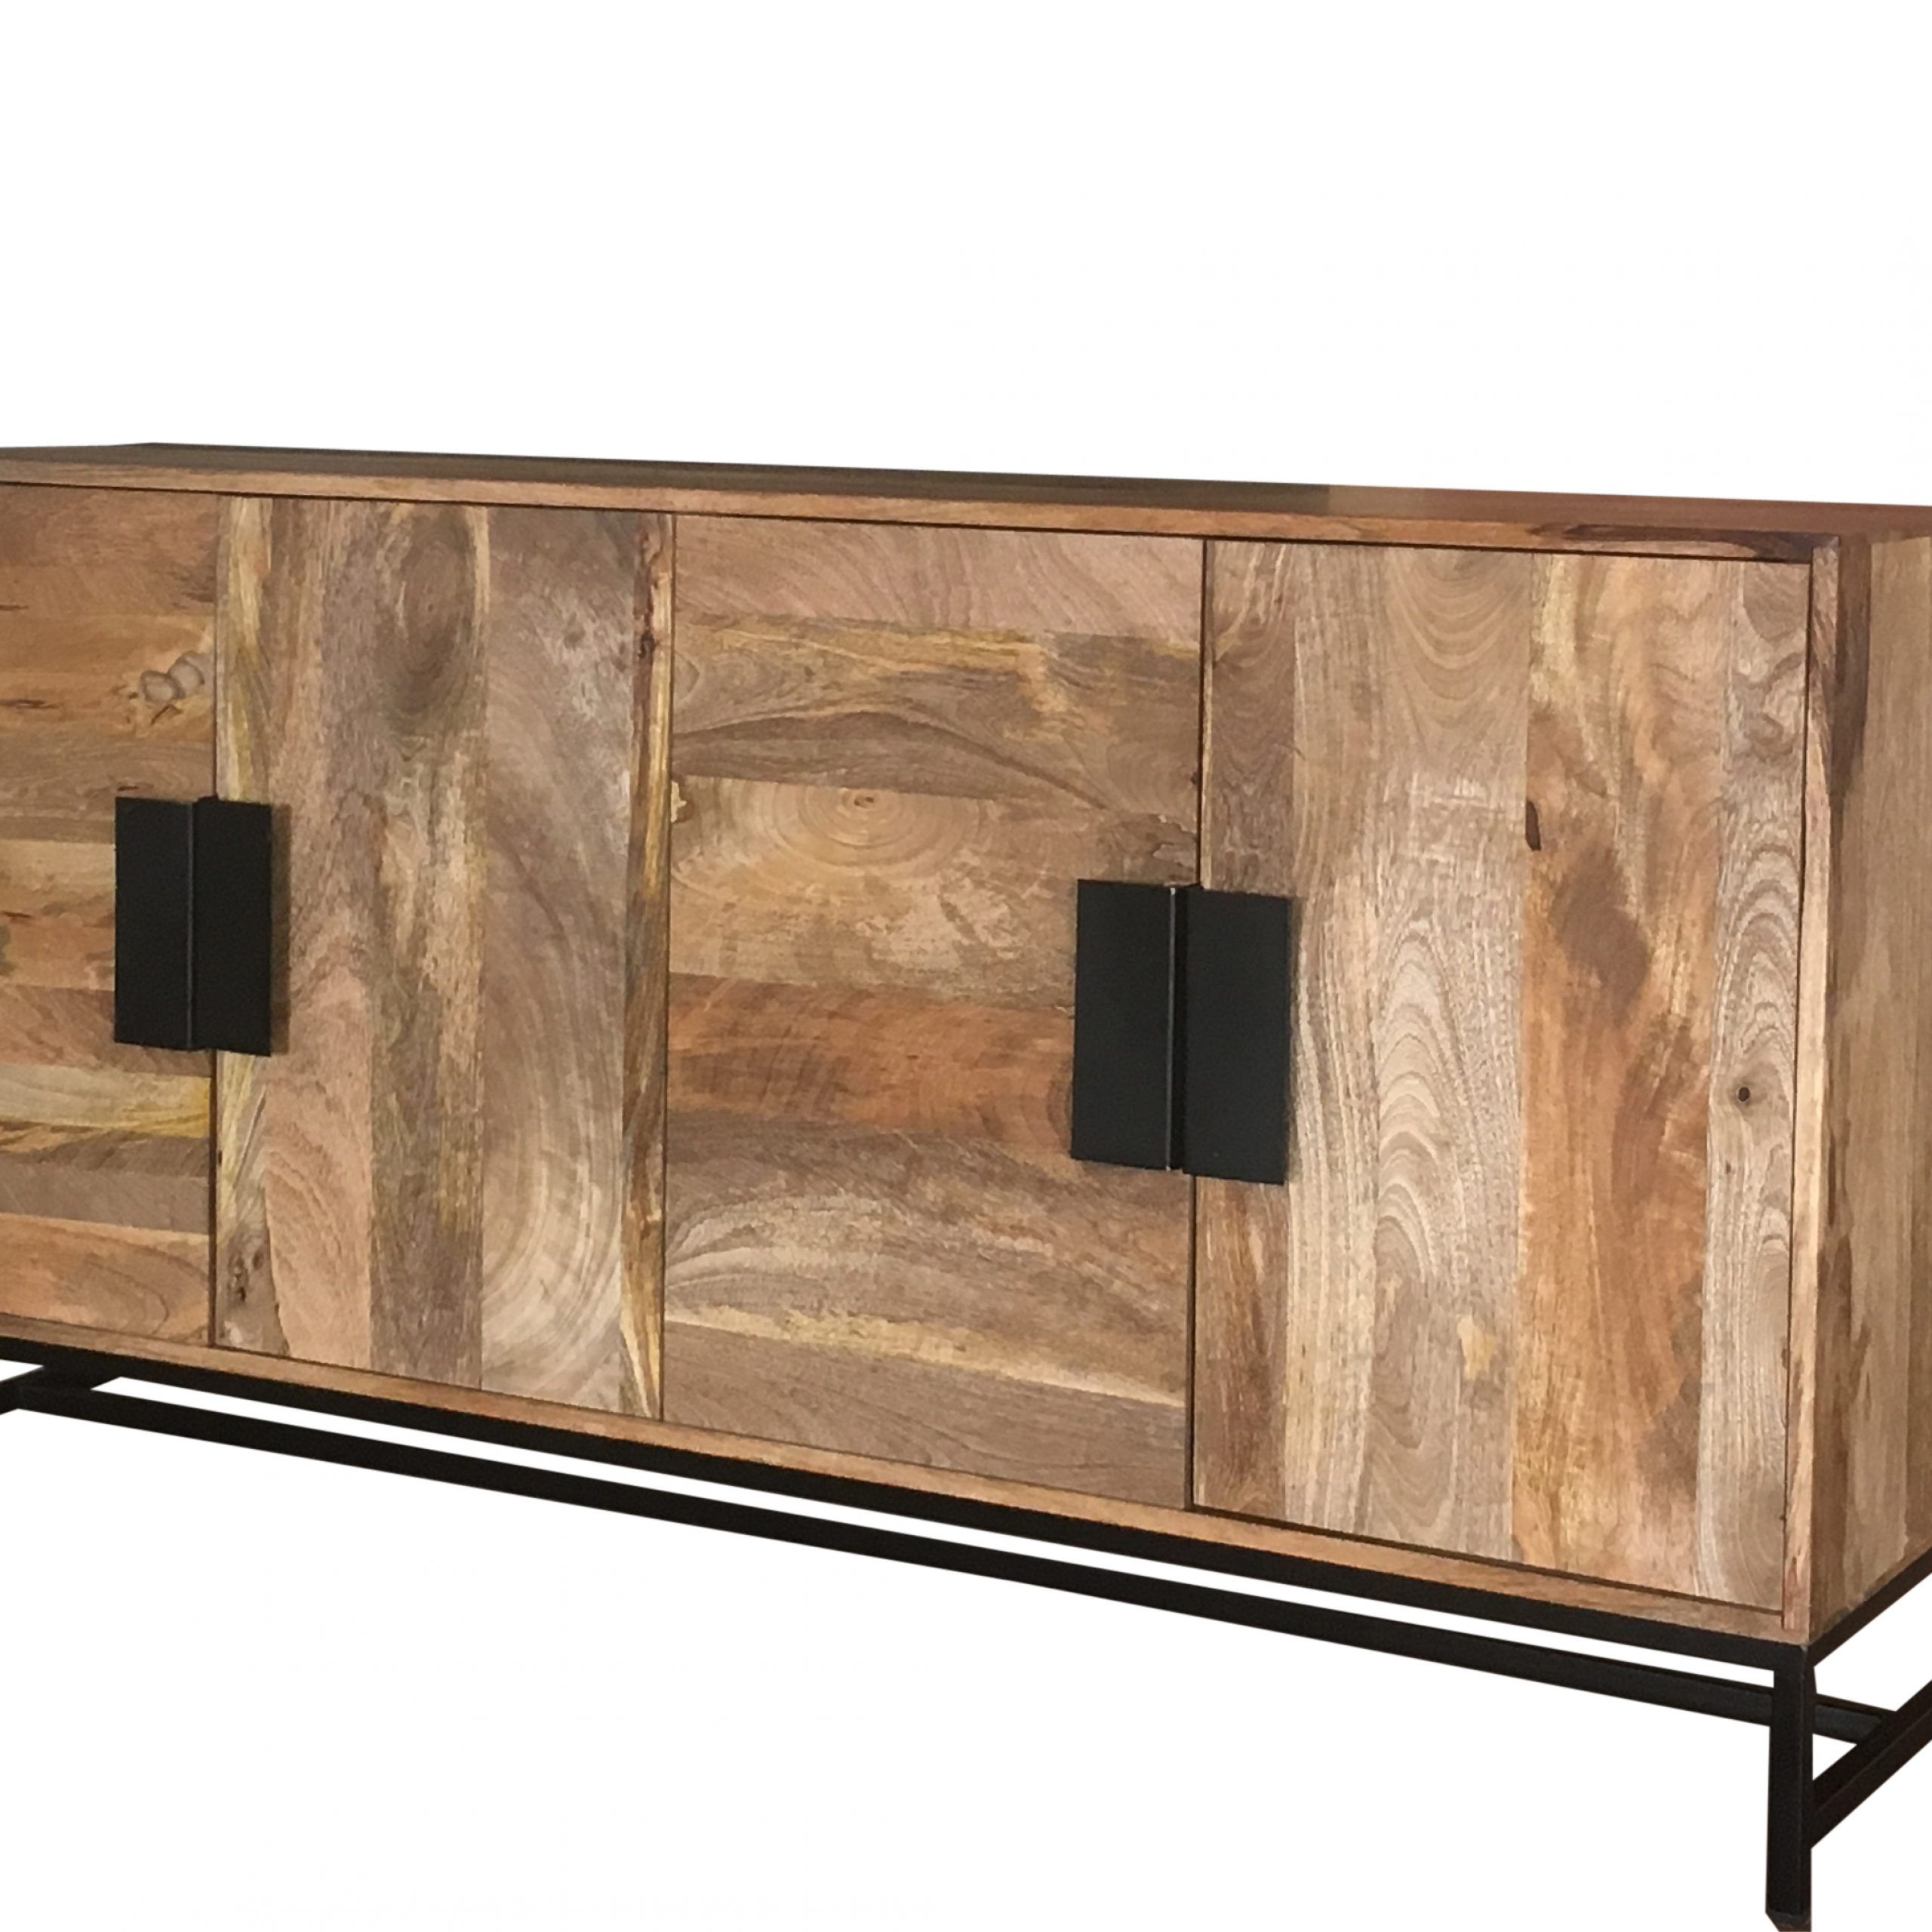 Urbanization Range Contemporary 4 Door Wooden Sideboard For Wood Accent Sideboards Buffet Serving Storage Cabinet With 4 Framed Glass Doors (View 2 of 15)